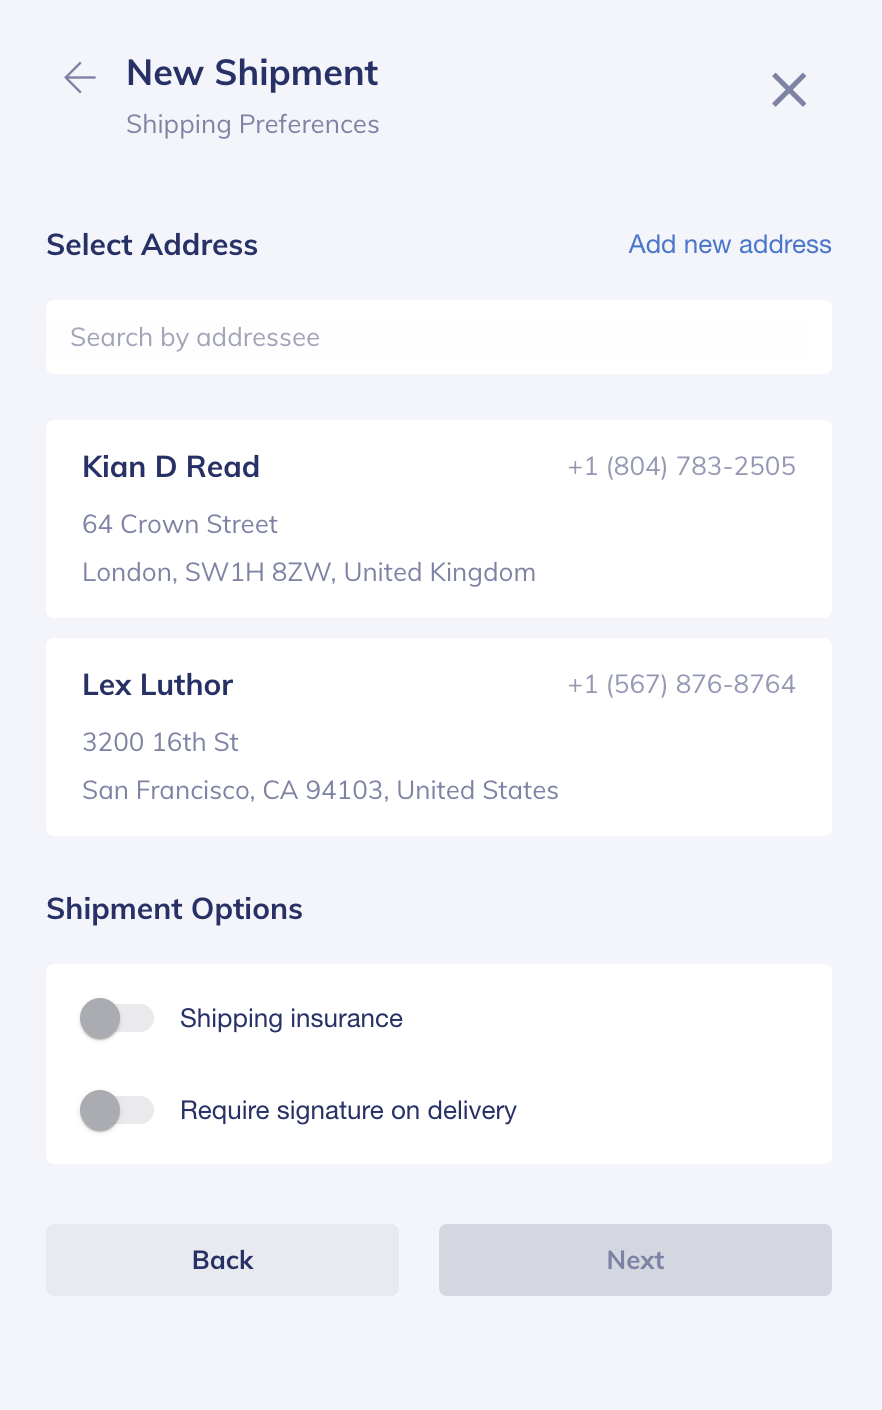 shipping-preferences-new-view.png